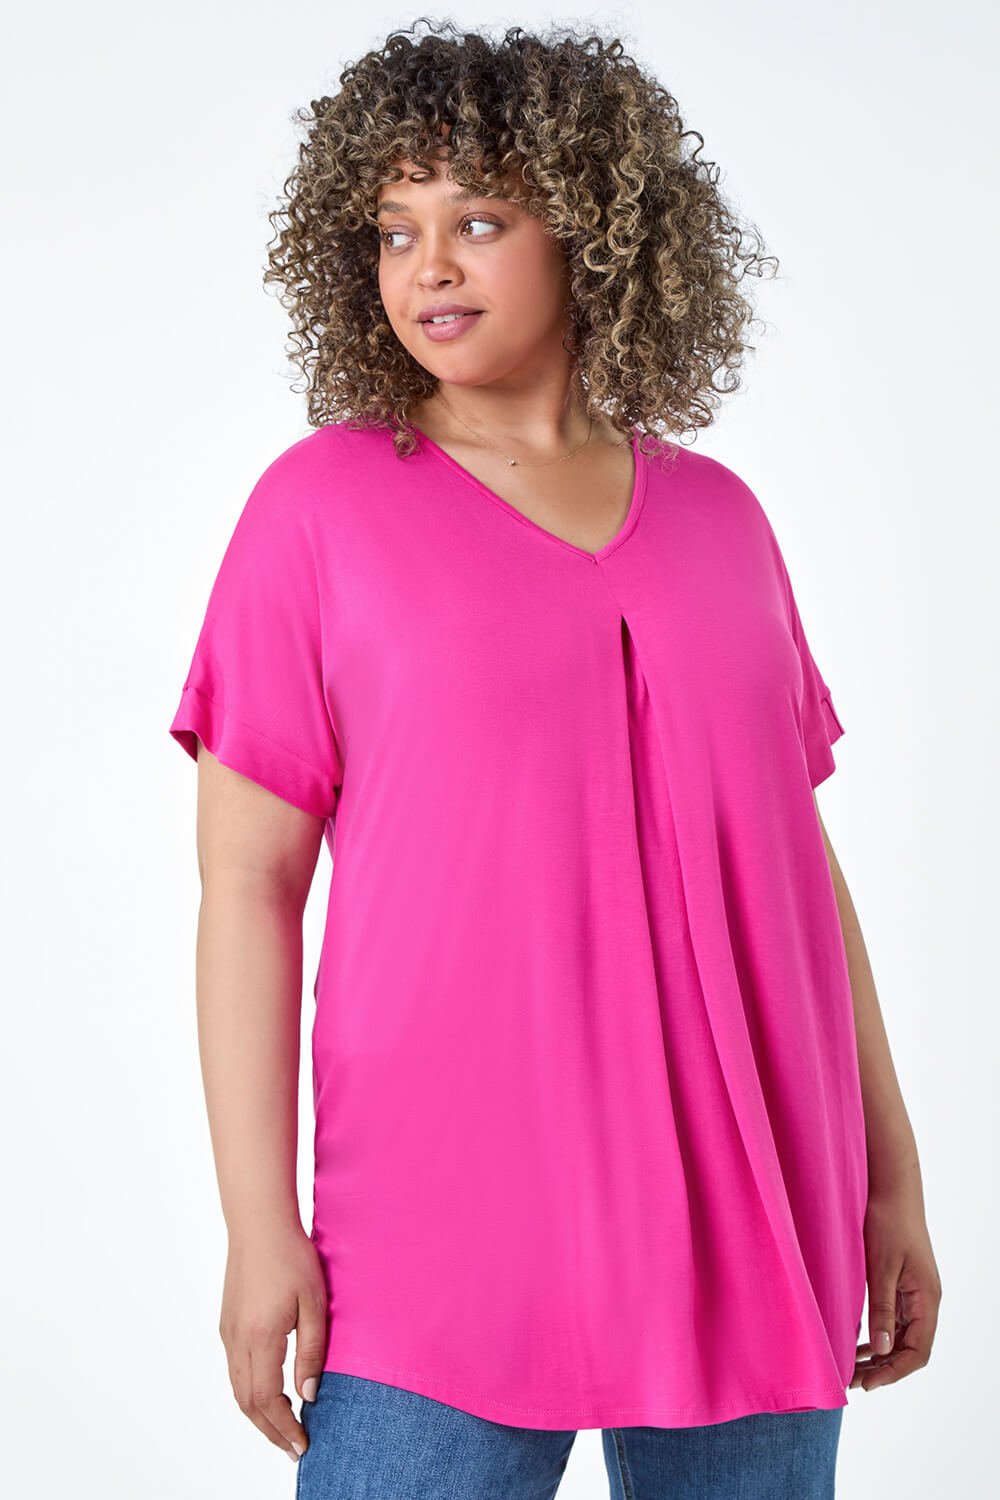 PINK Curve Plain Pleat Front Stretch Top, Image 4 of 5